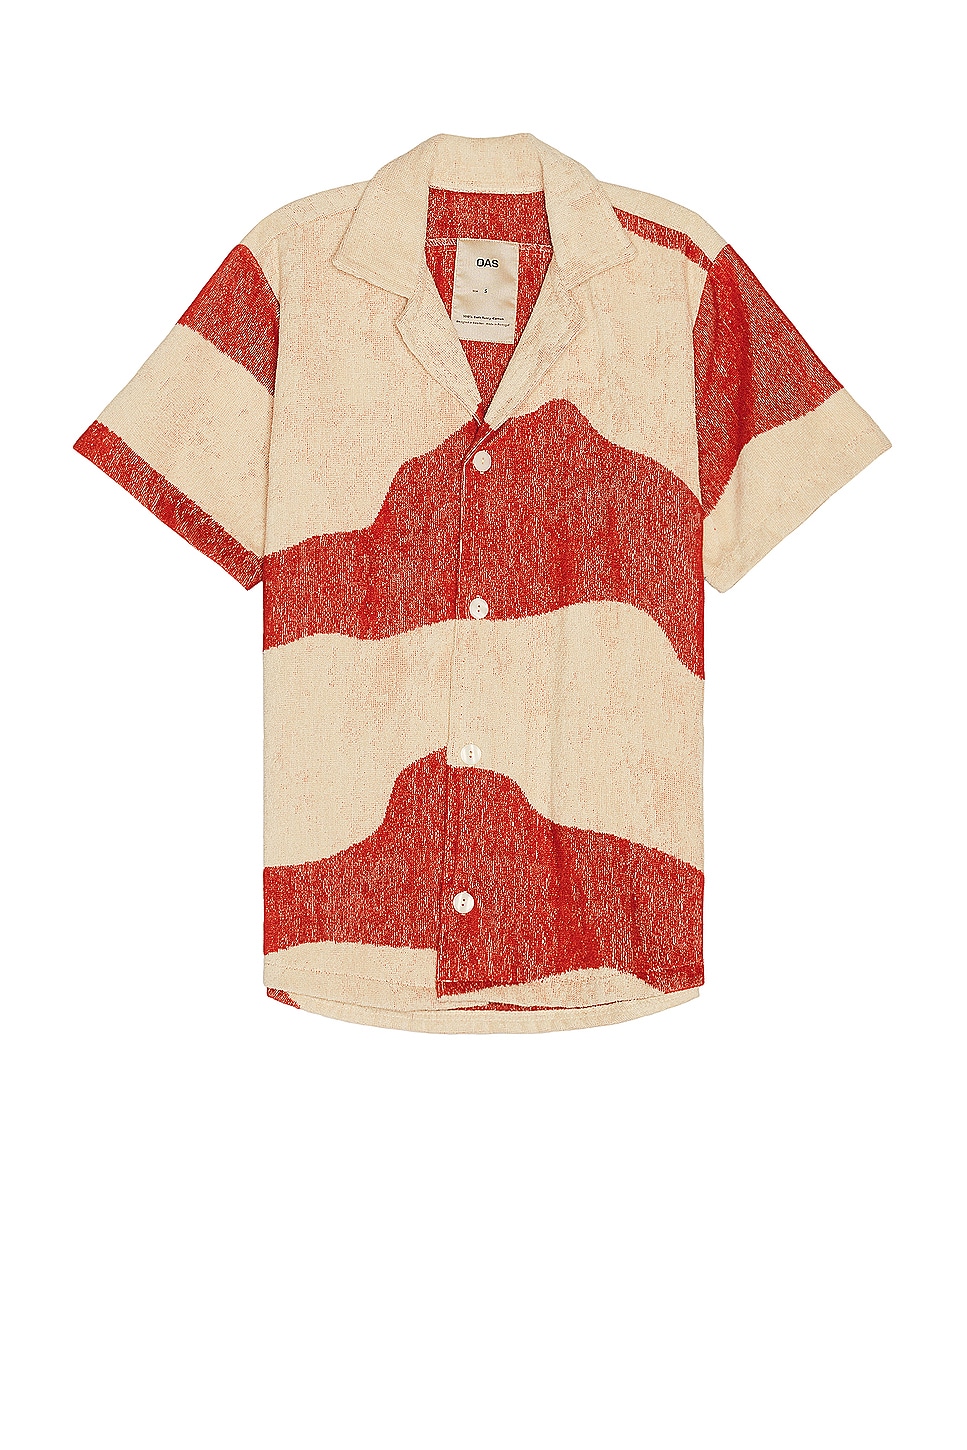 Image 1 of OAS Amber Dune Cuba Terry Shirt in Terracotta